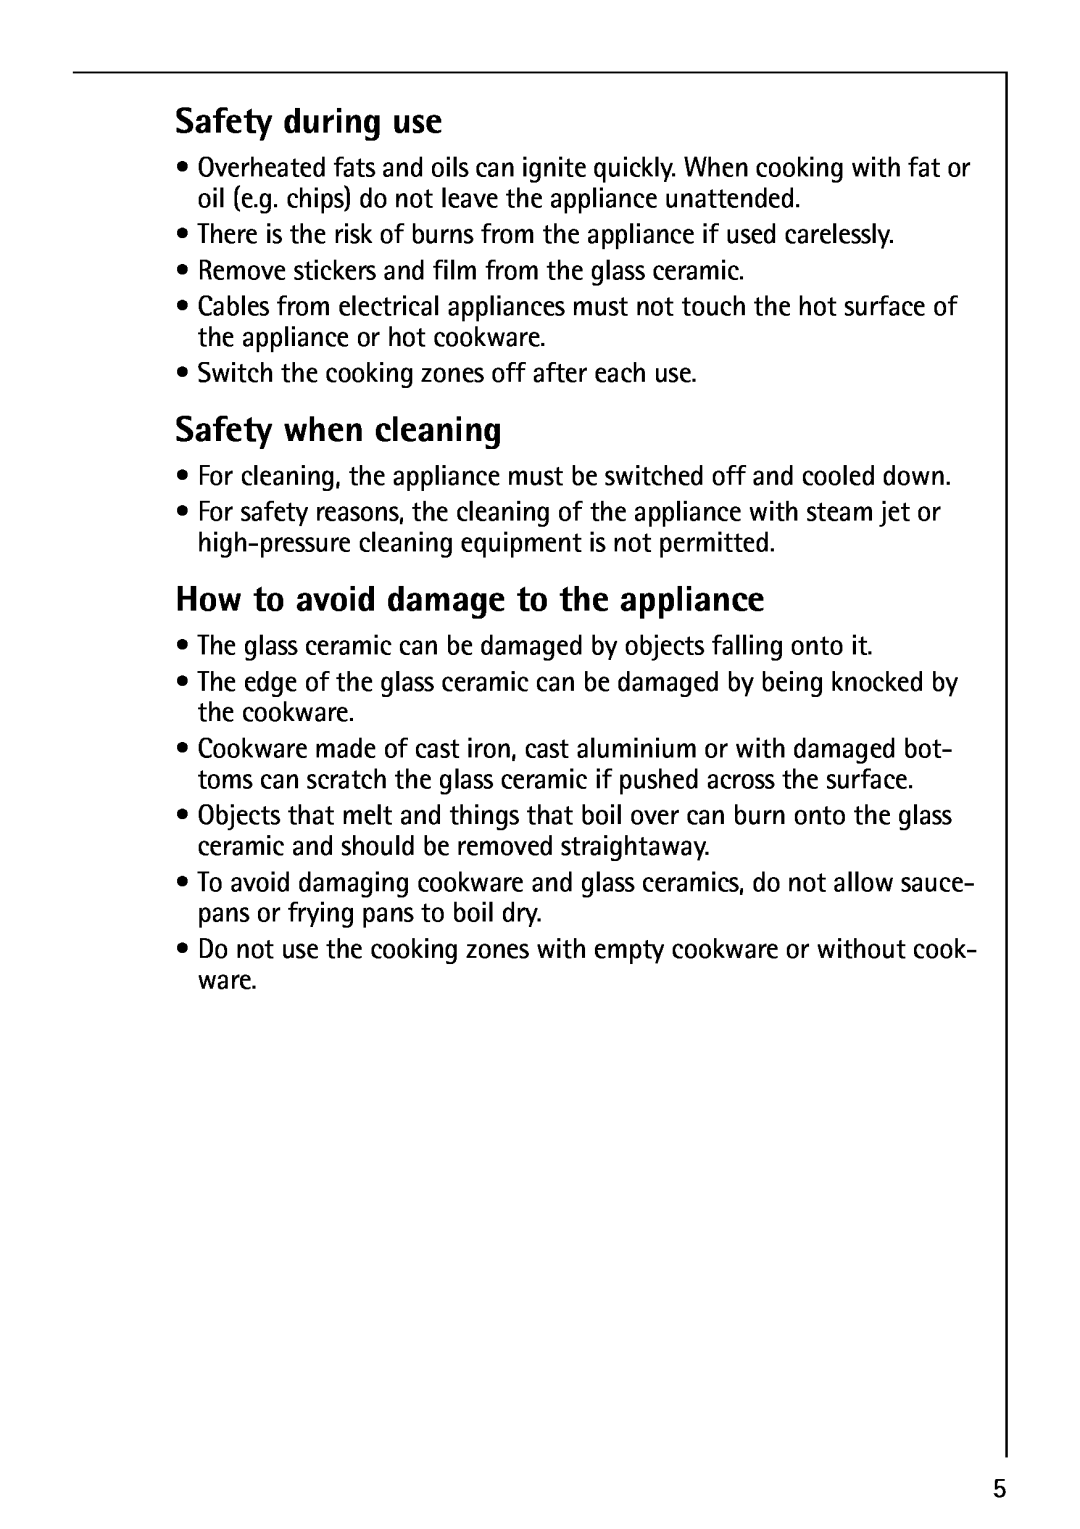 Electrolux 66301K-MN manual Safety during use, Safety when cleaning, How to avoid damage to the appliance 